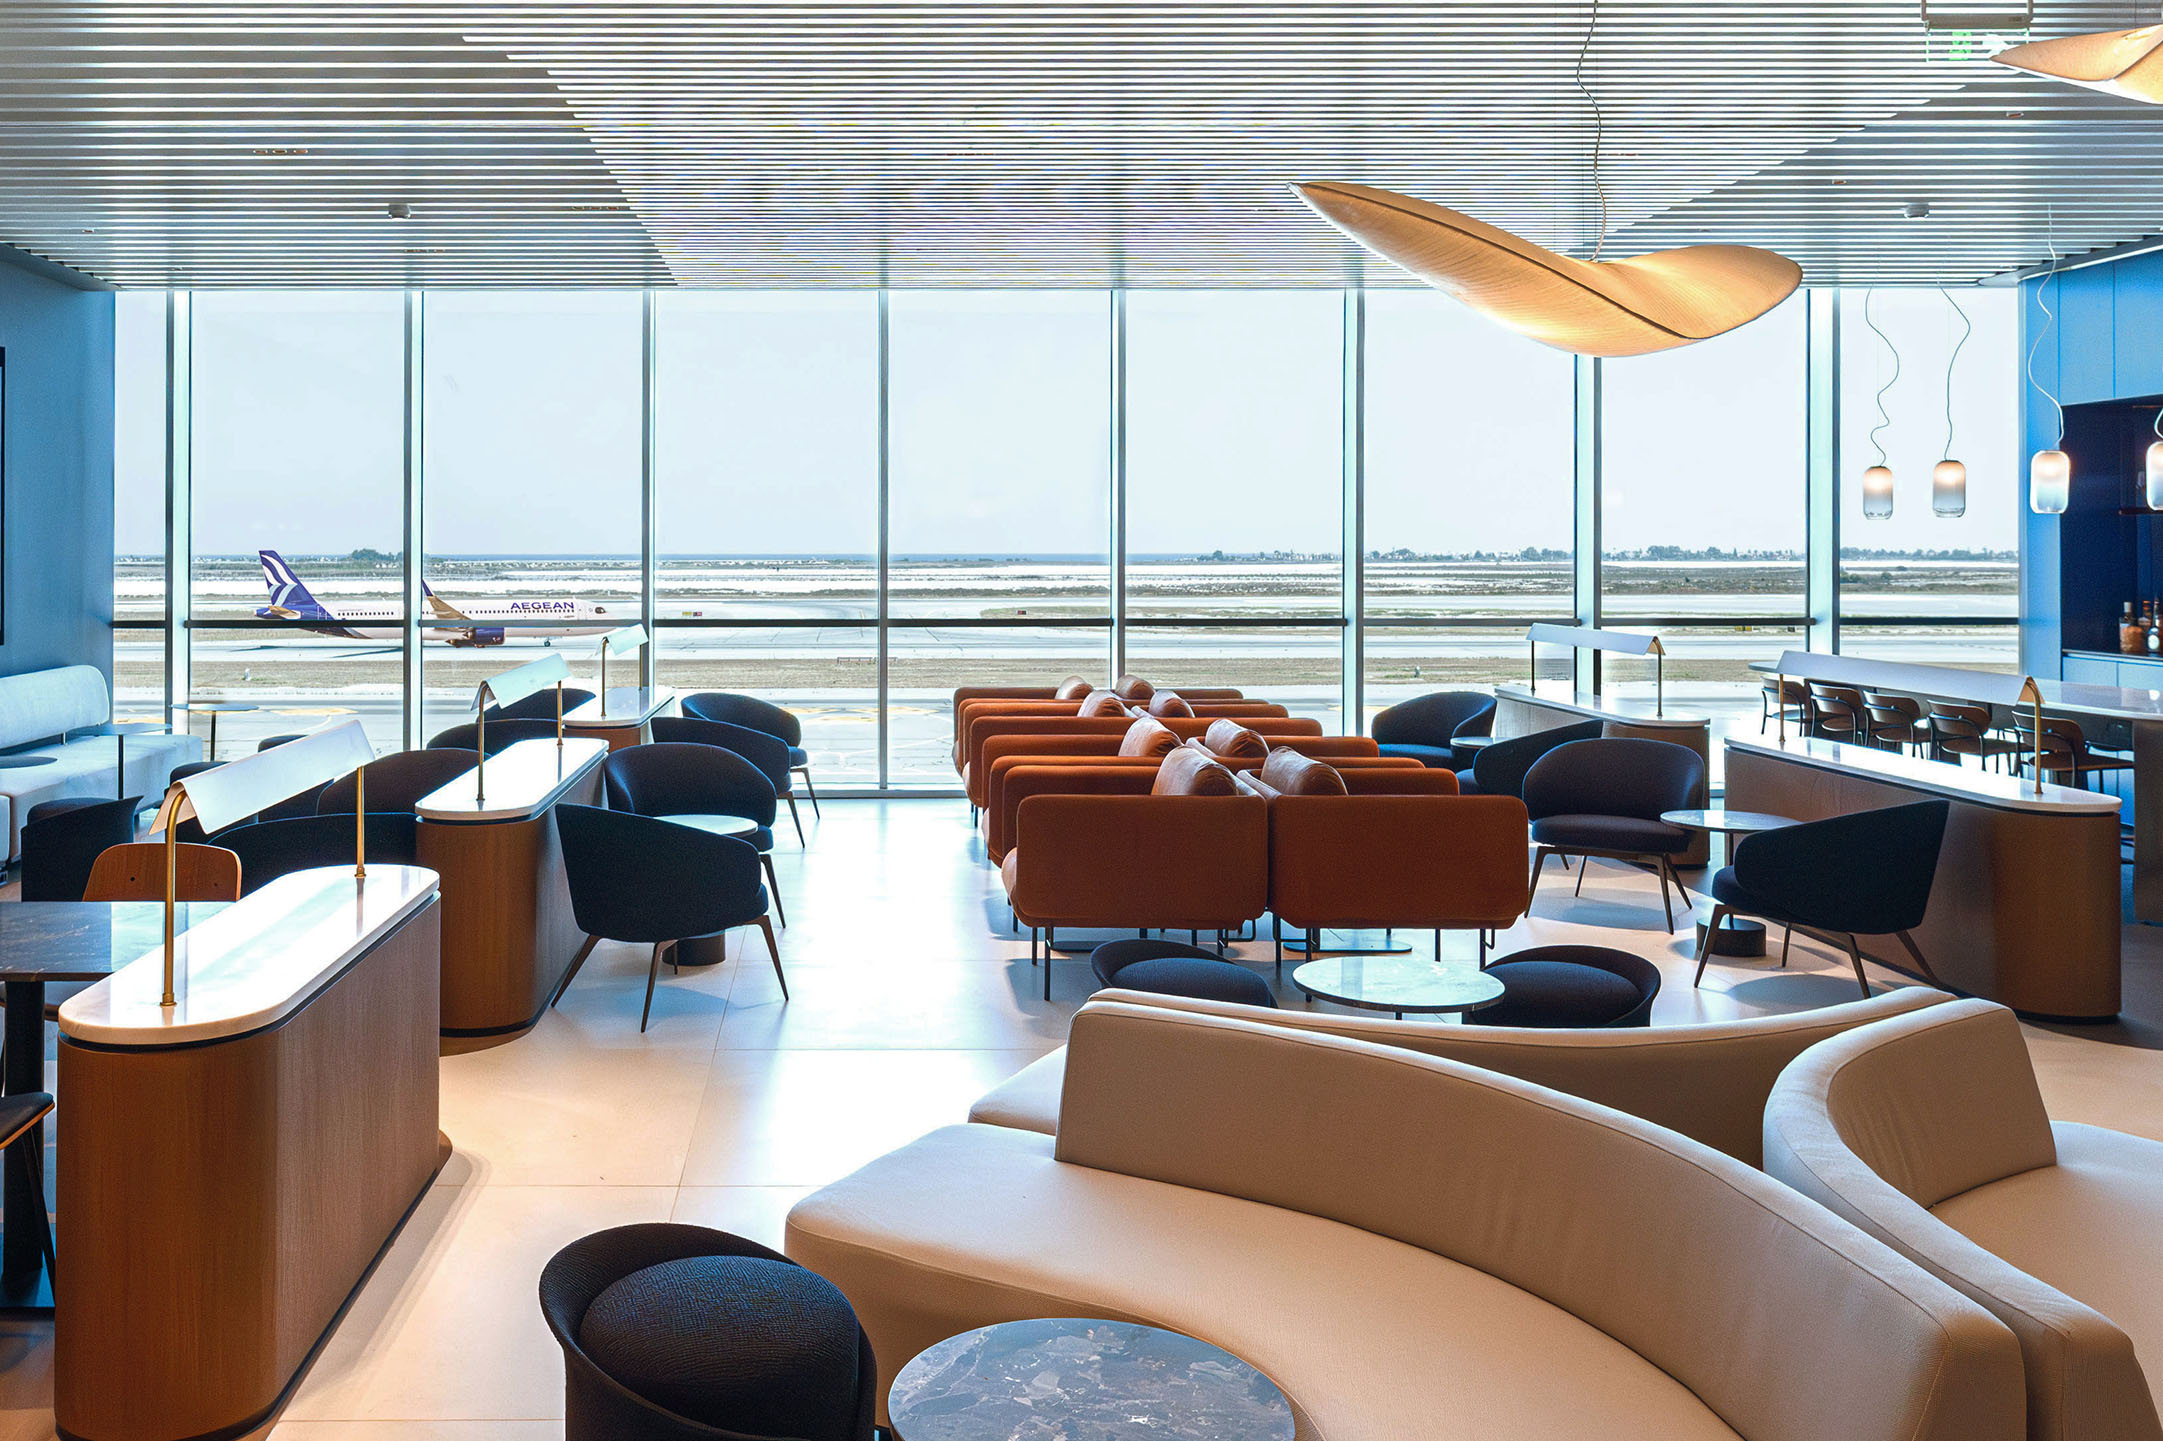 image AEGEAN welcomes its passengers to its new Business Lounge at Larnaca International Airport